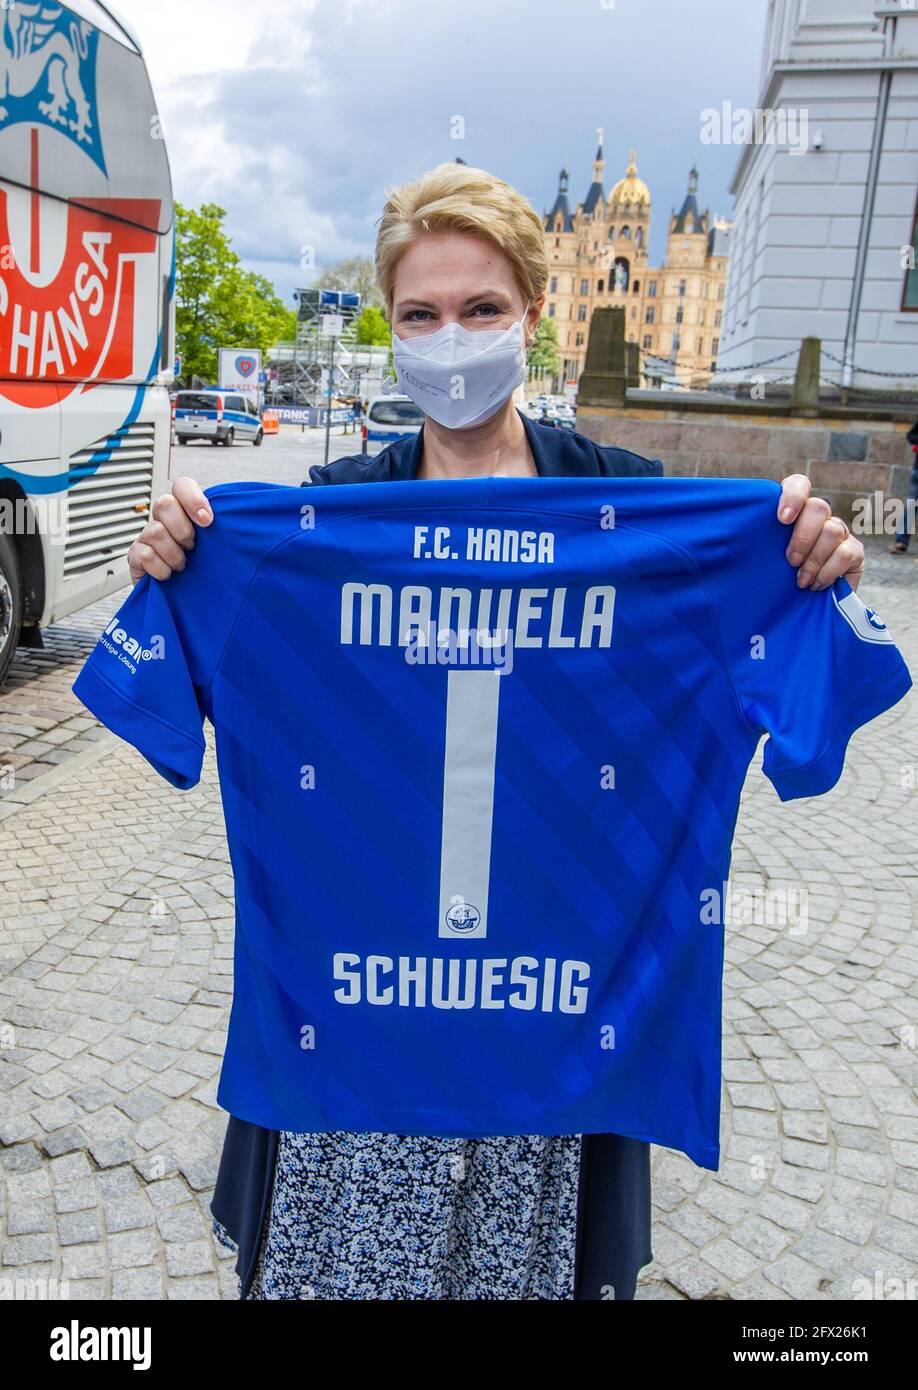 Schwerin, Germany. 25th May, 2021. Manuela Schwesig (SPD), Prime Minister  of Mecklenburg-Western Pomerania, holds a jersey of the football club FC  Hansa Rostock with her name and the number 1 on the